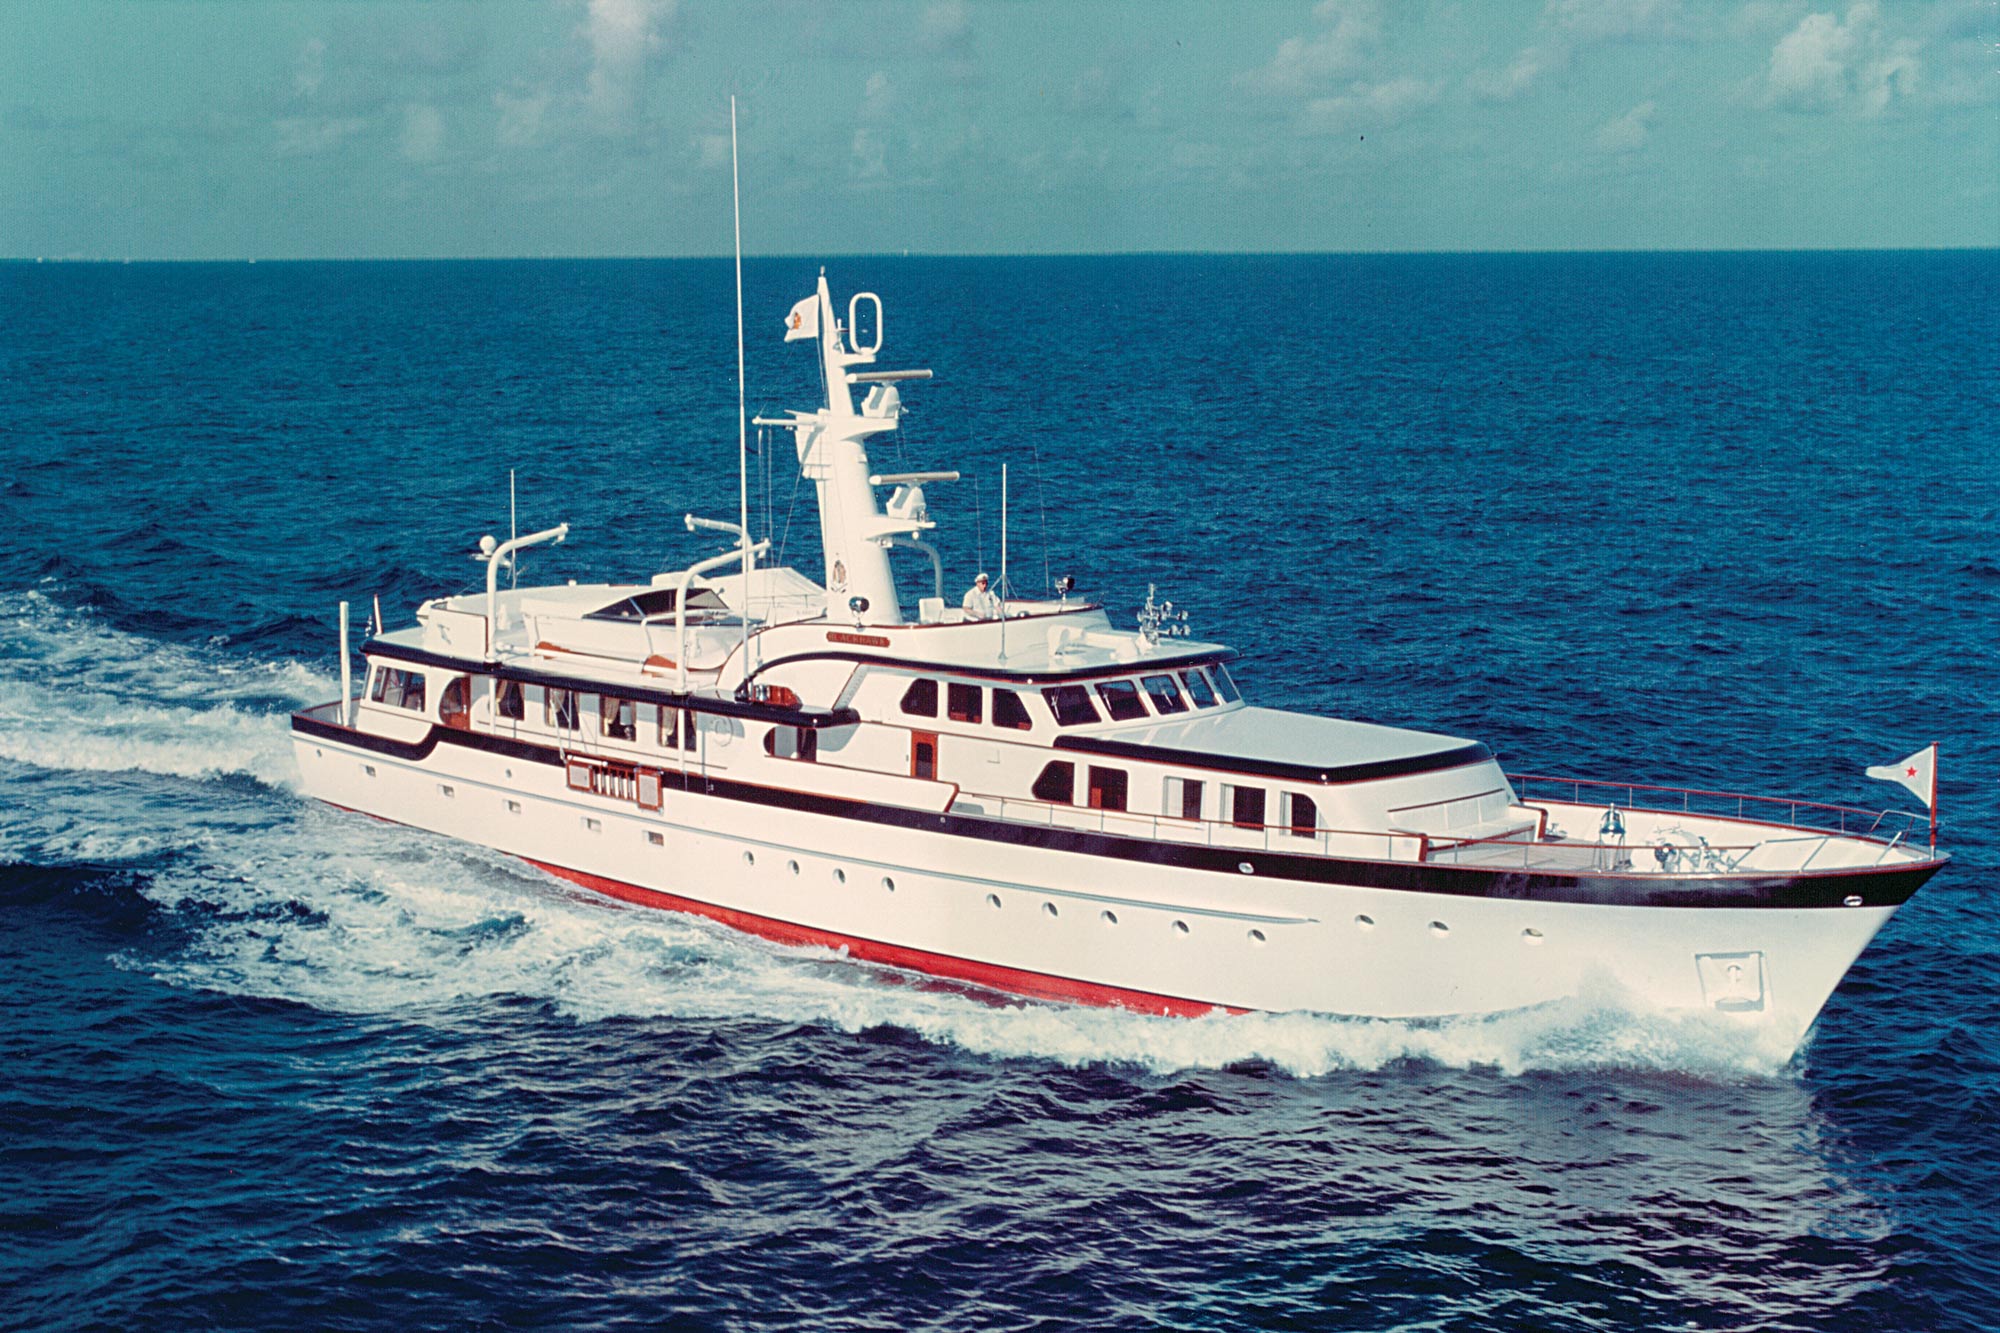 50 Years of Family Memories Aboard 'Blackhawk' | Yachting